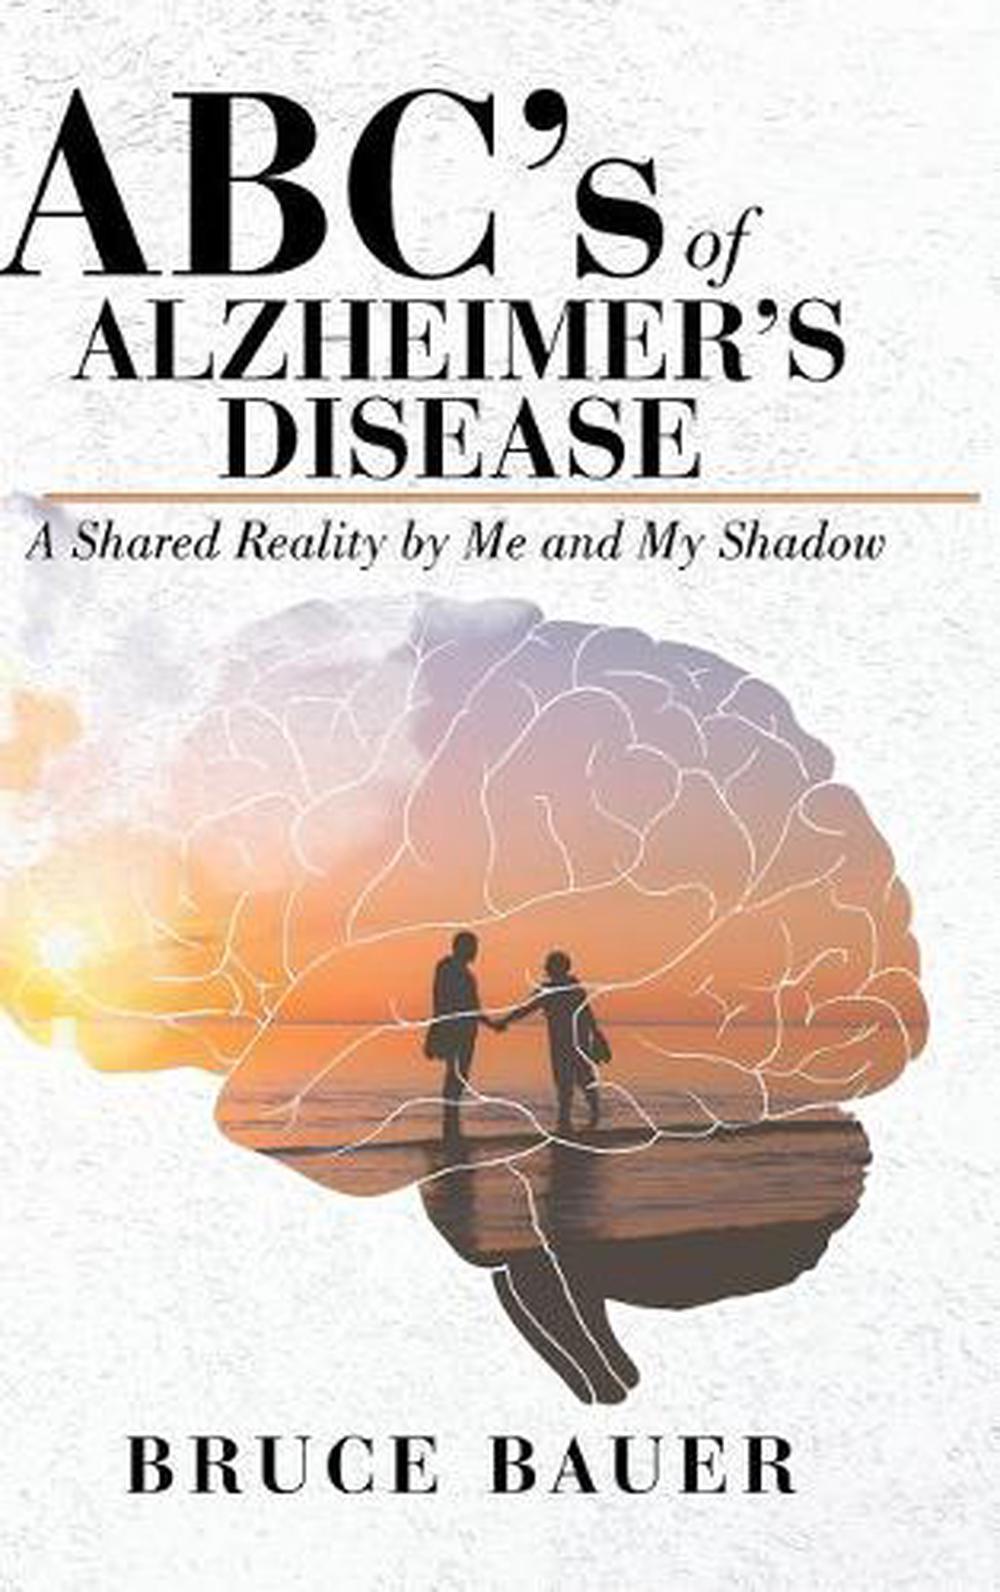 abc-s-of-alzheimers-disease-by-bauer-bruce-bauer-english-hardcover-book-free-s-9781645592839